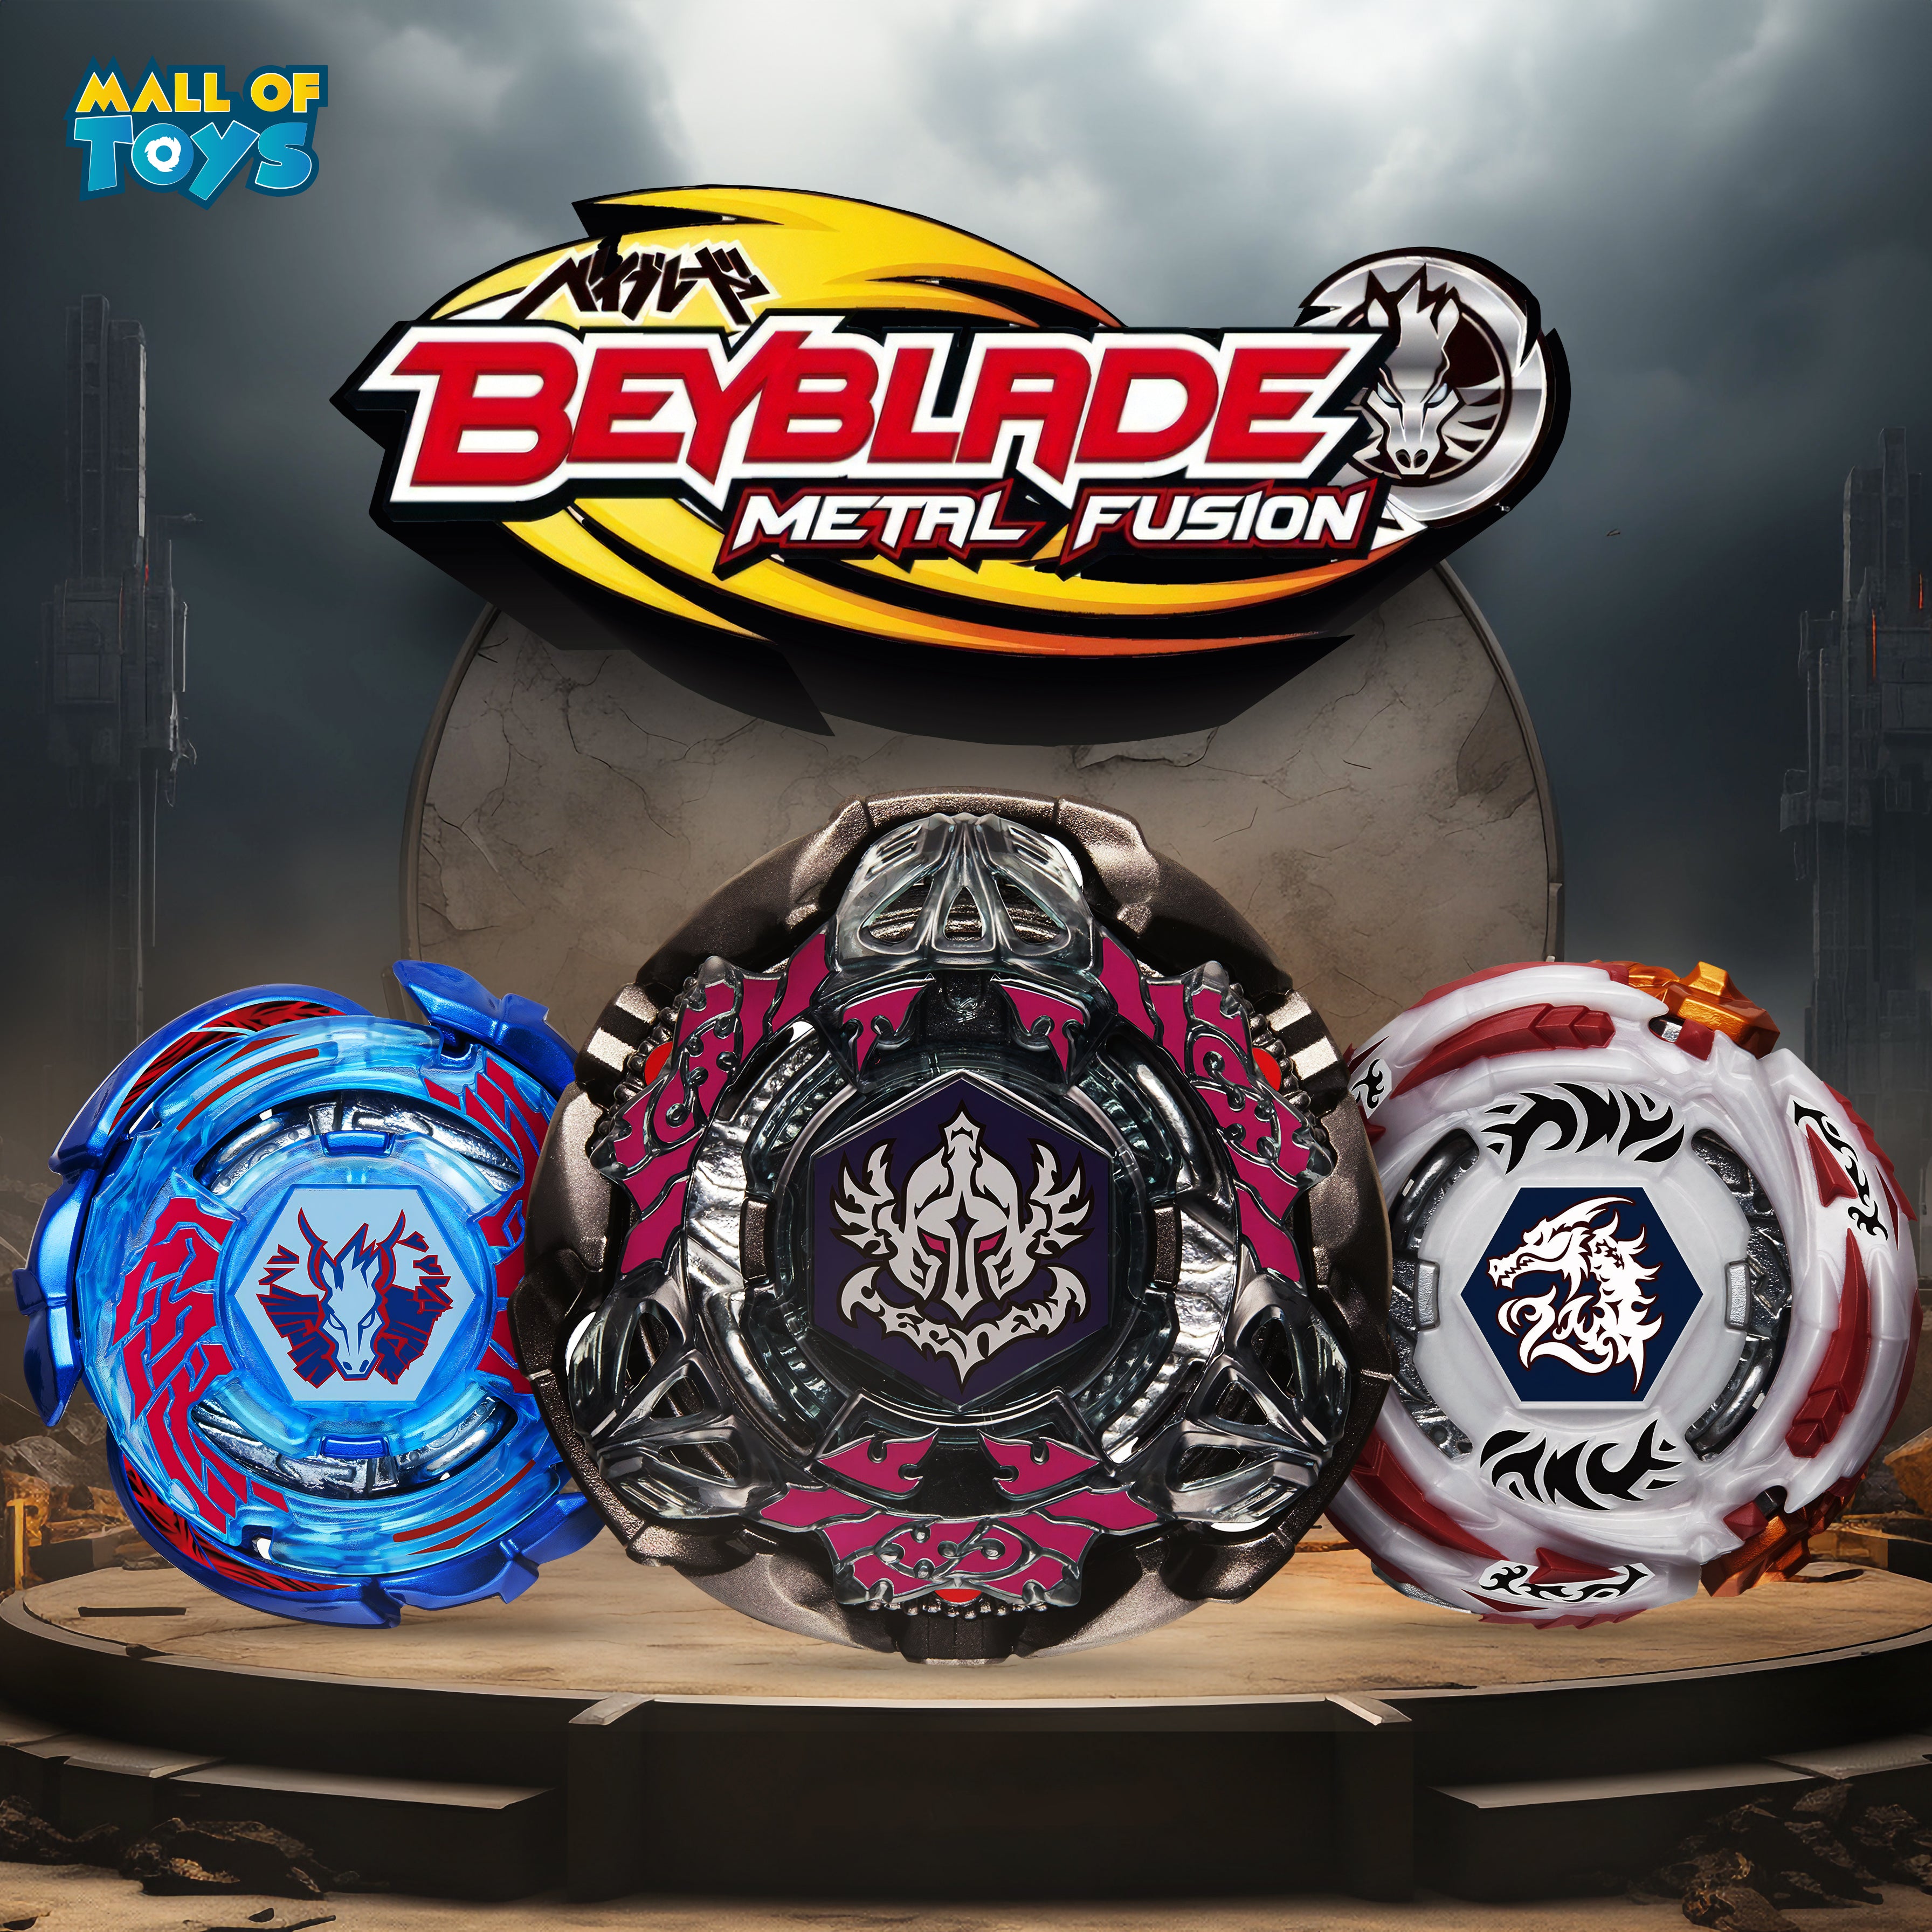 Beyblade Metal Fusion Generation – Mall Of Toys